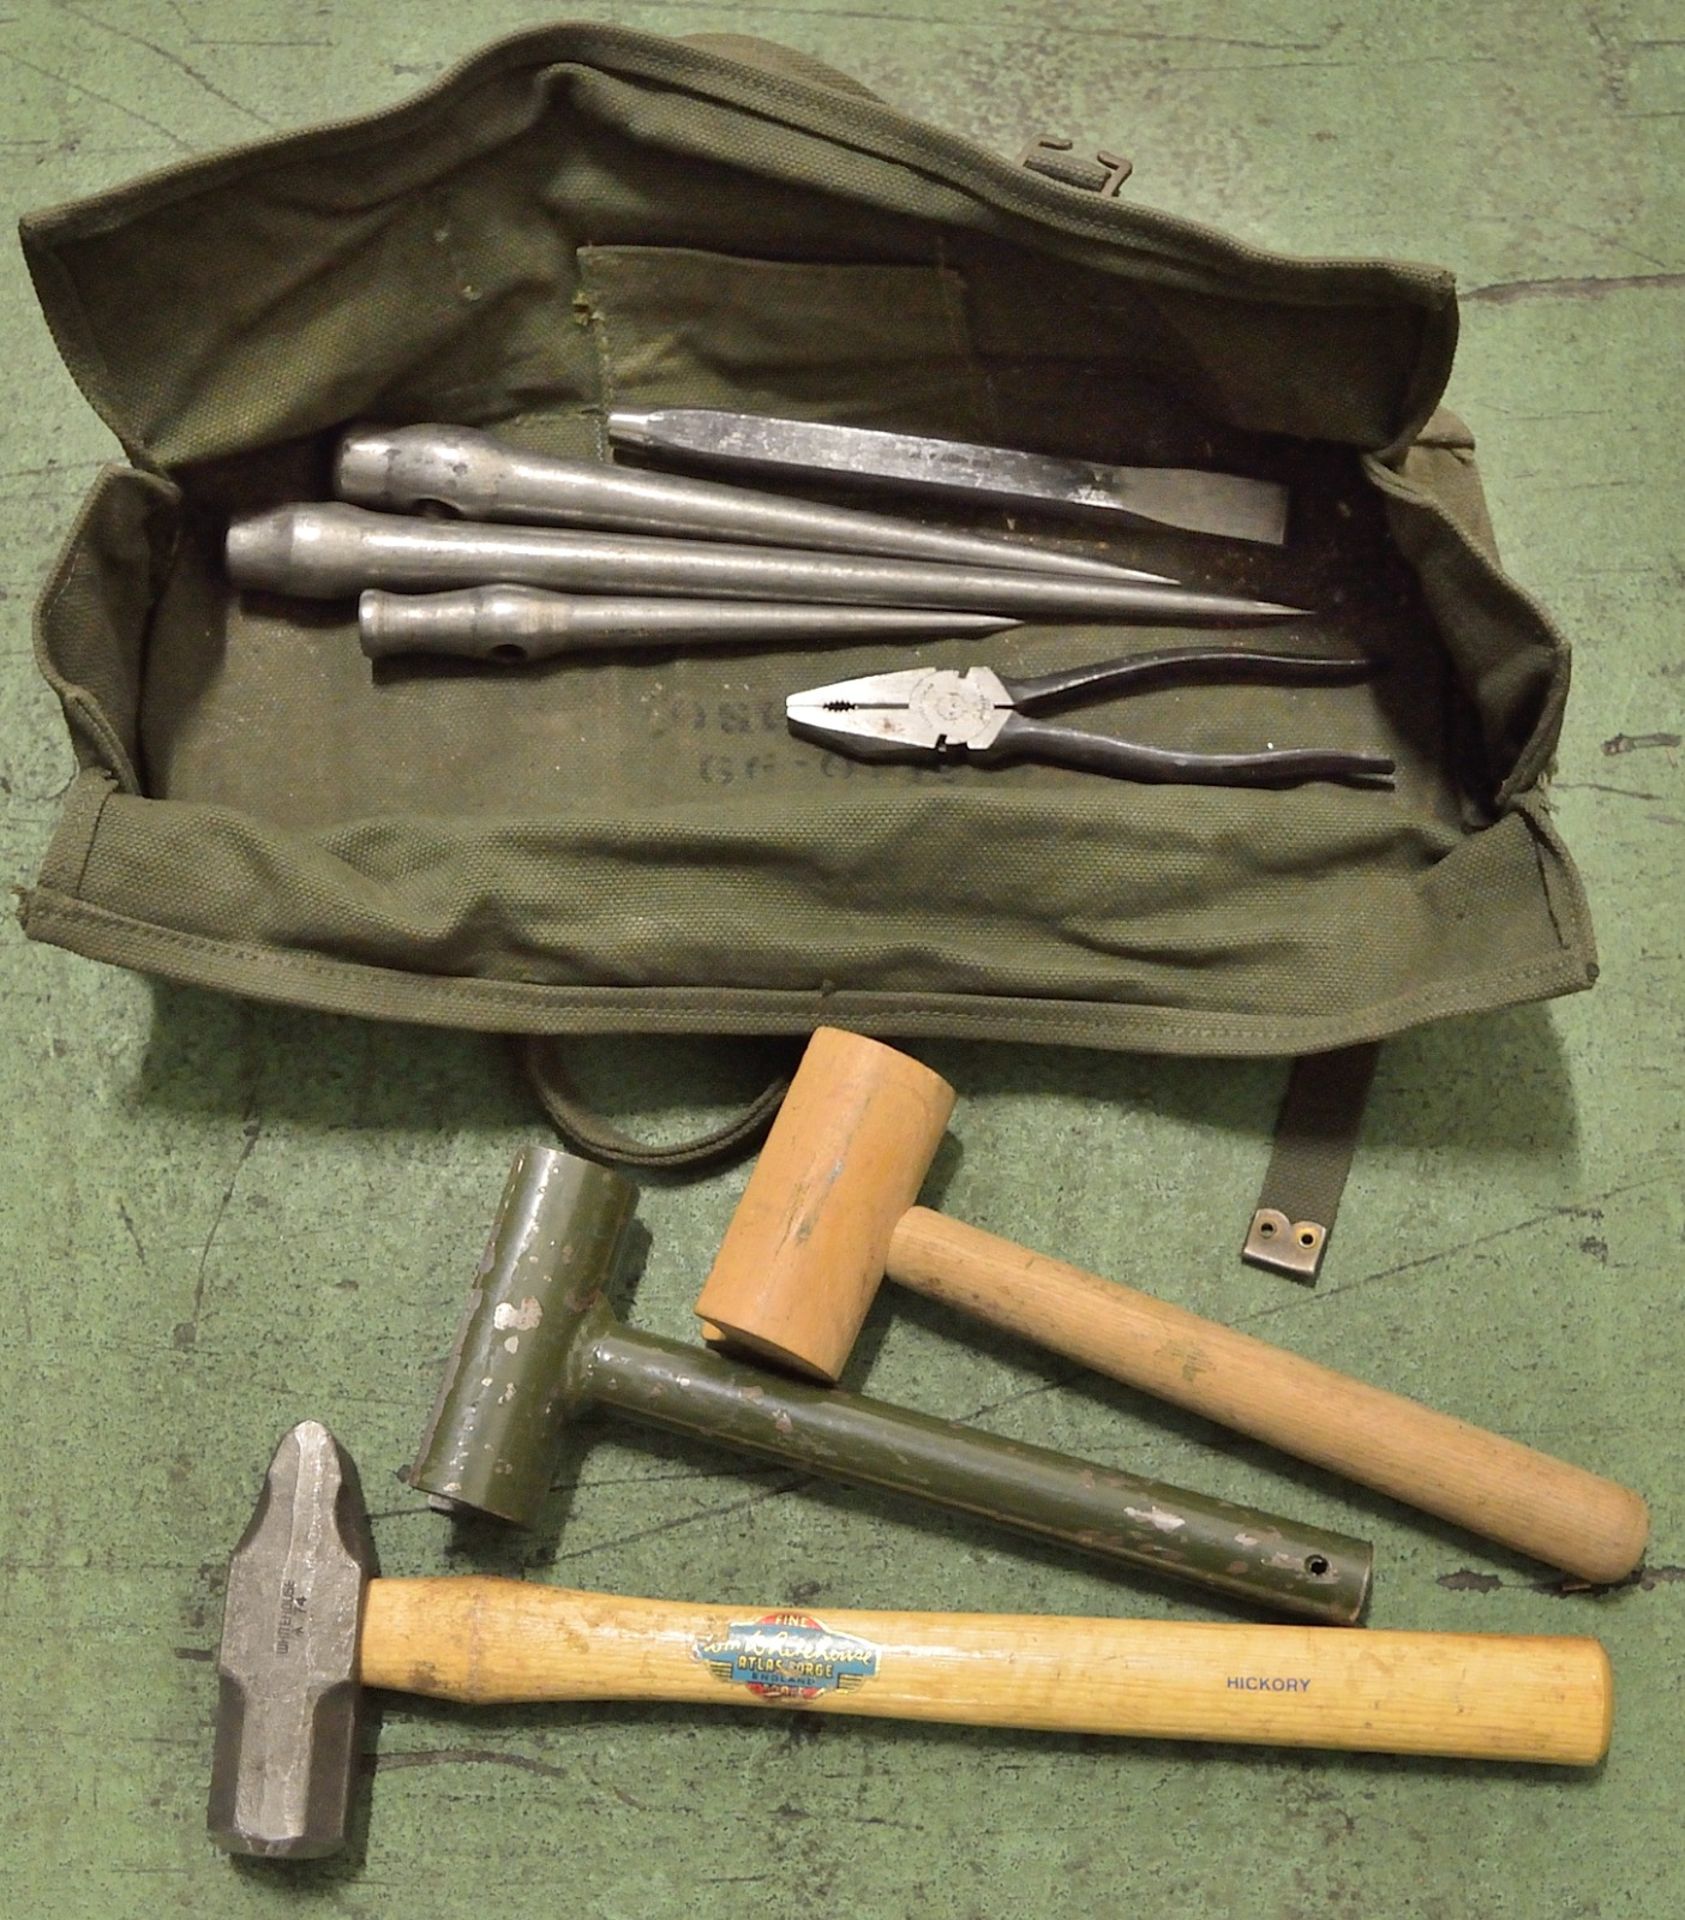 Hammer, Shaping Tools, Pins, Pliers - In toolbag.